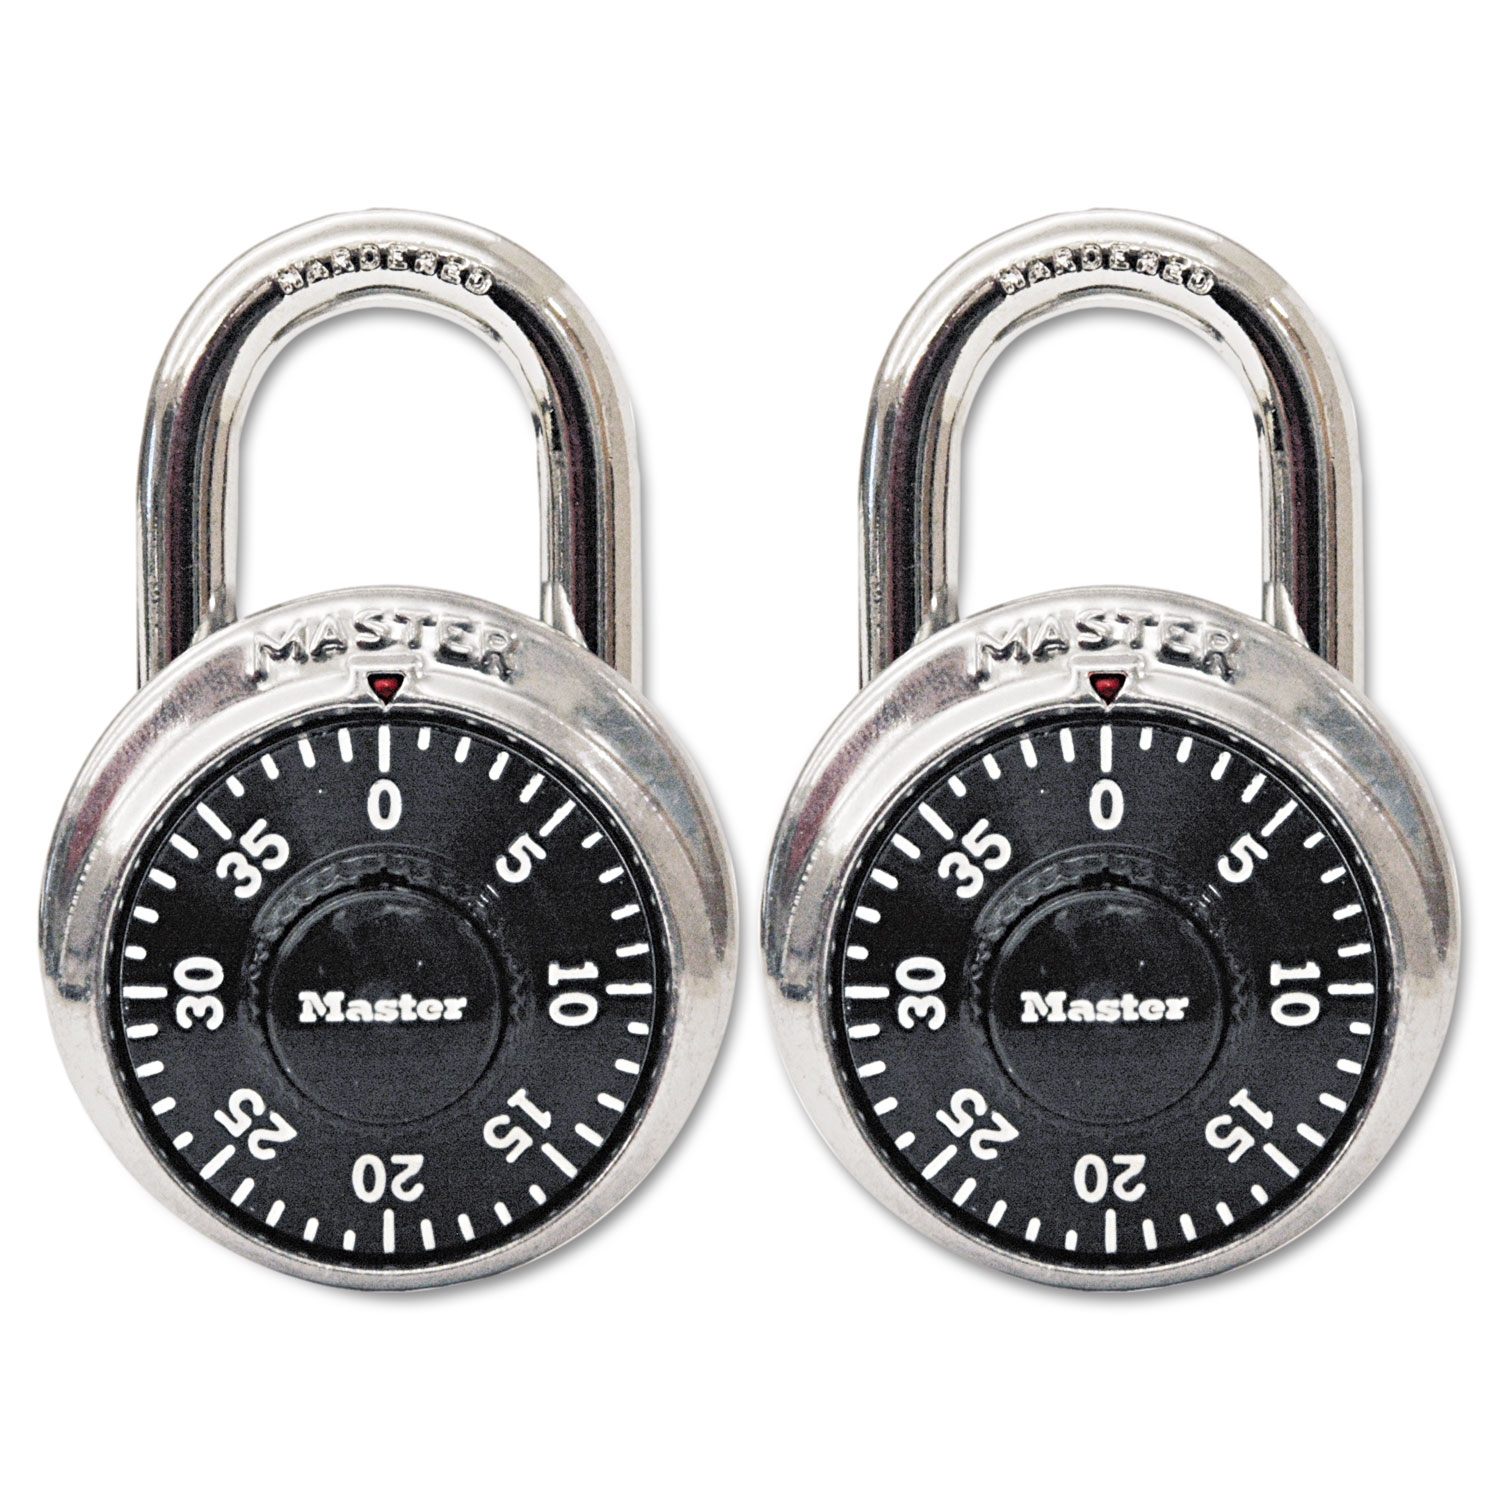 Combination Lock, Stainless Steel, 1 7/8 Wide, Black Dial, 2/Pack